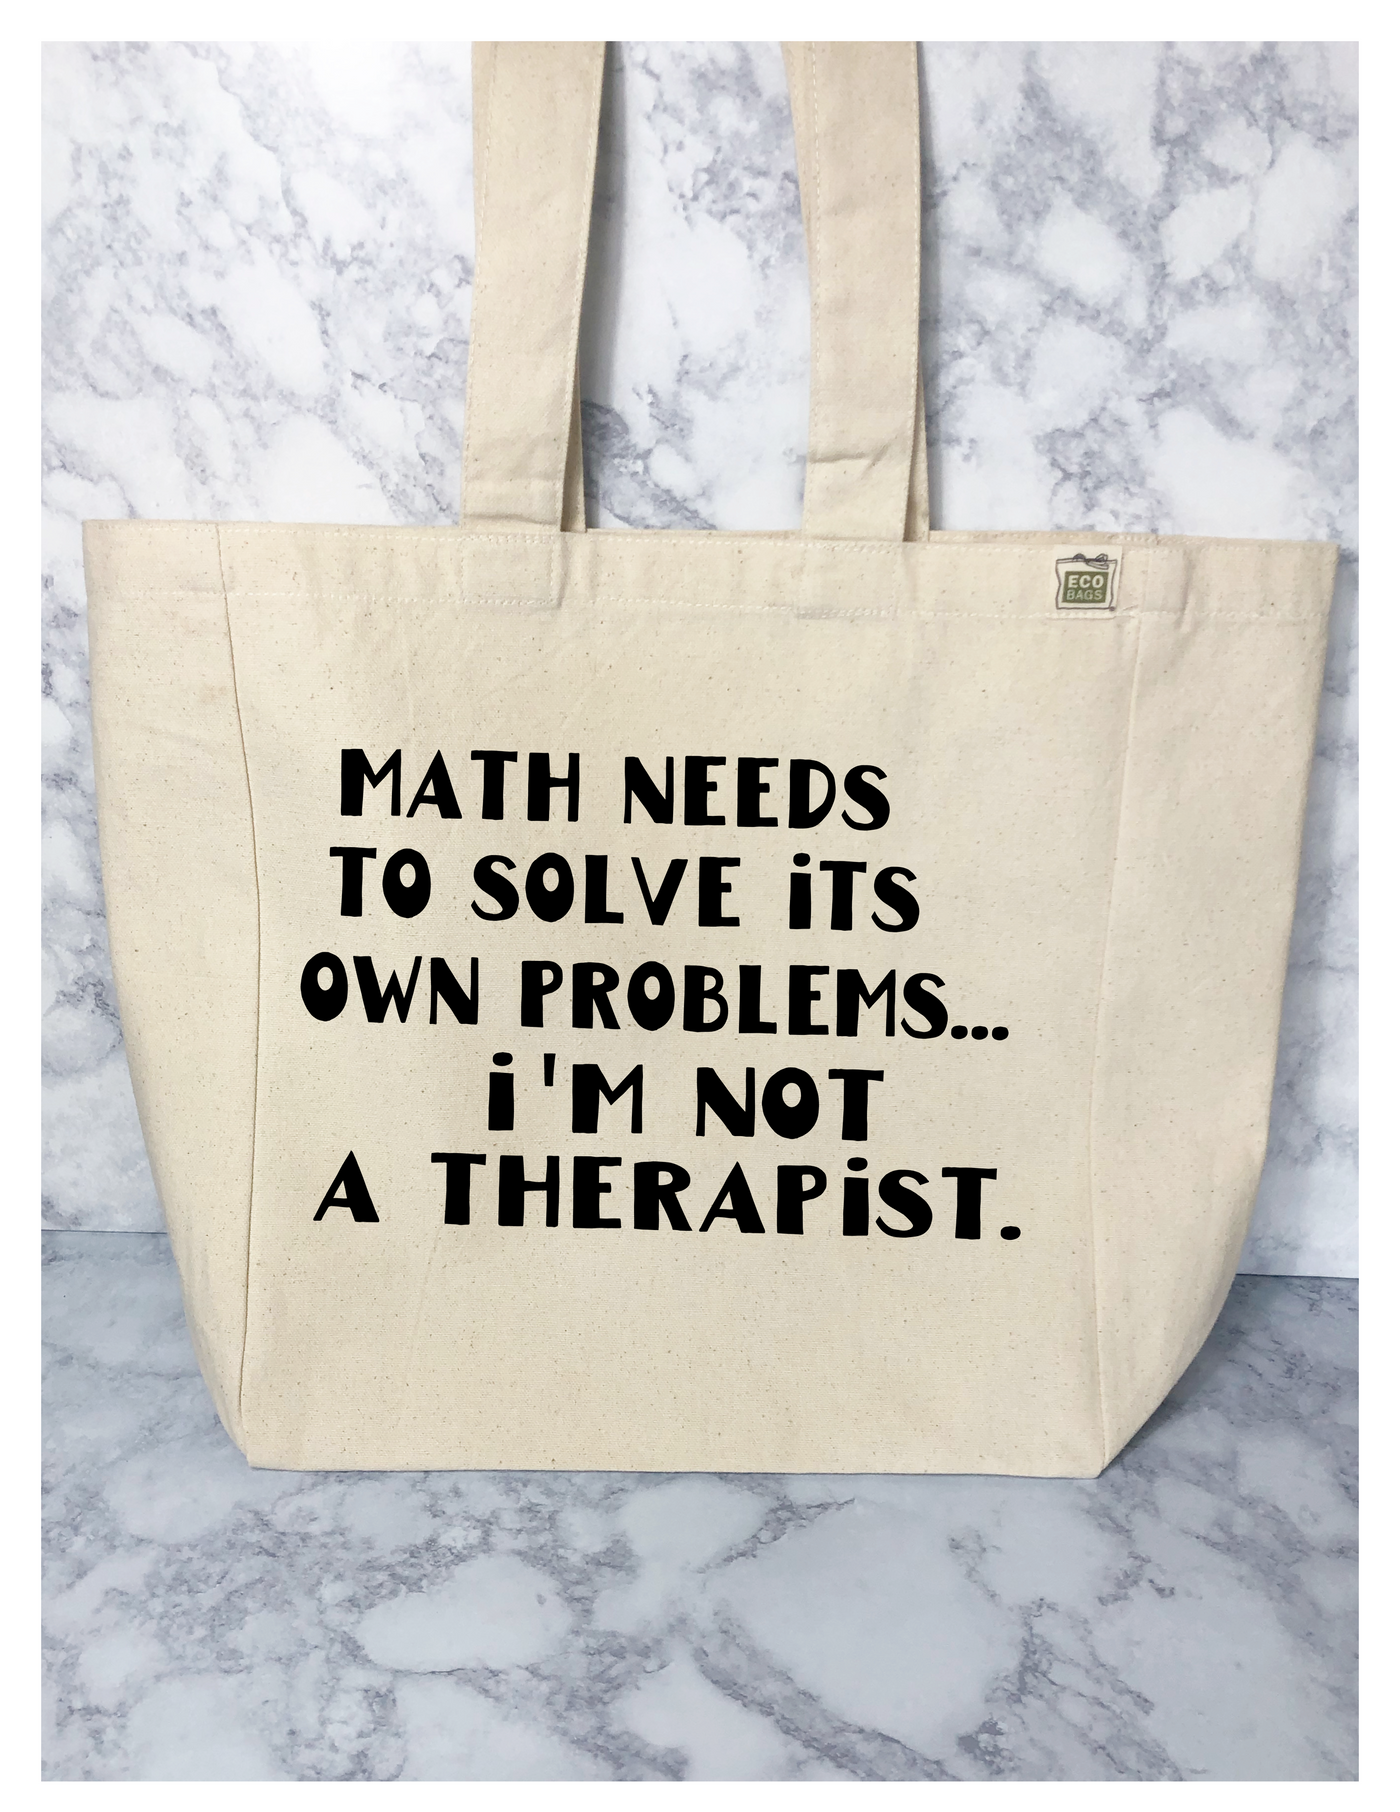 math needs to solve its own problems - tote bag